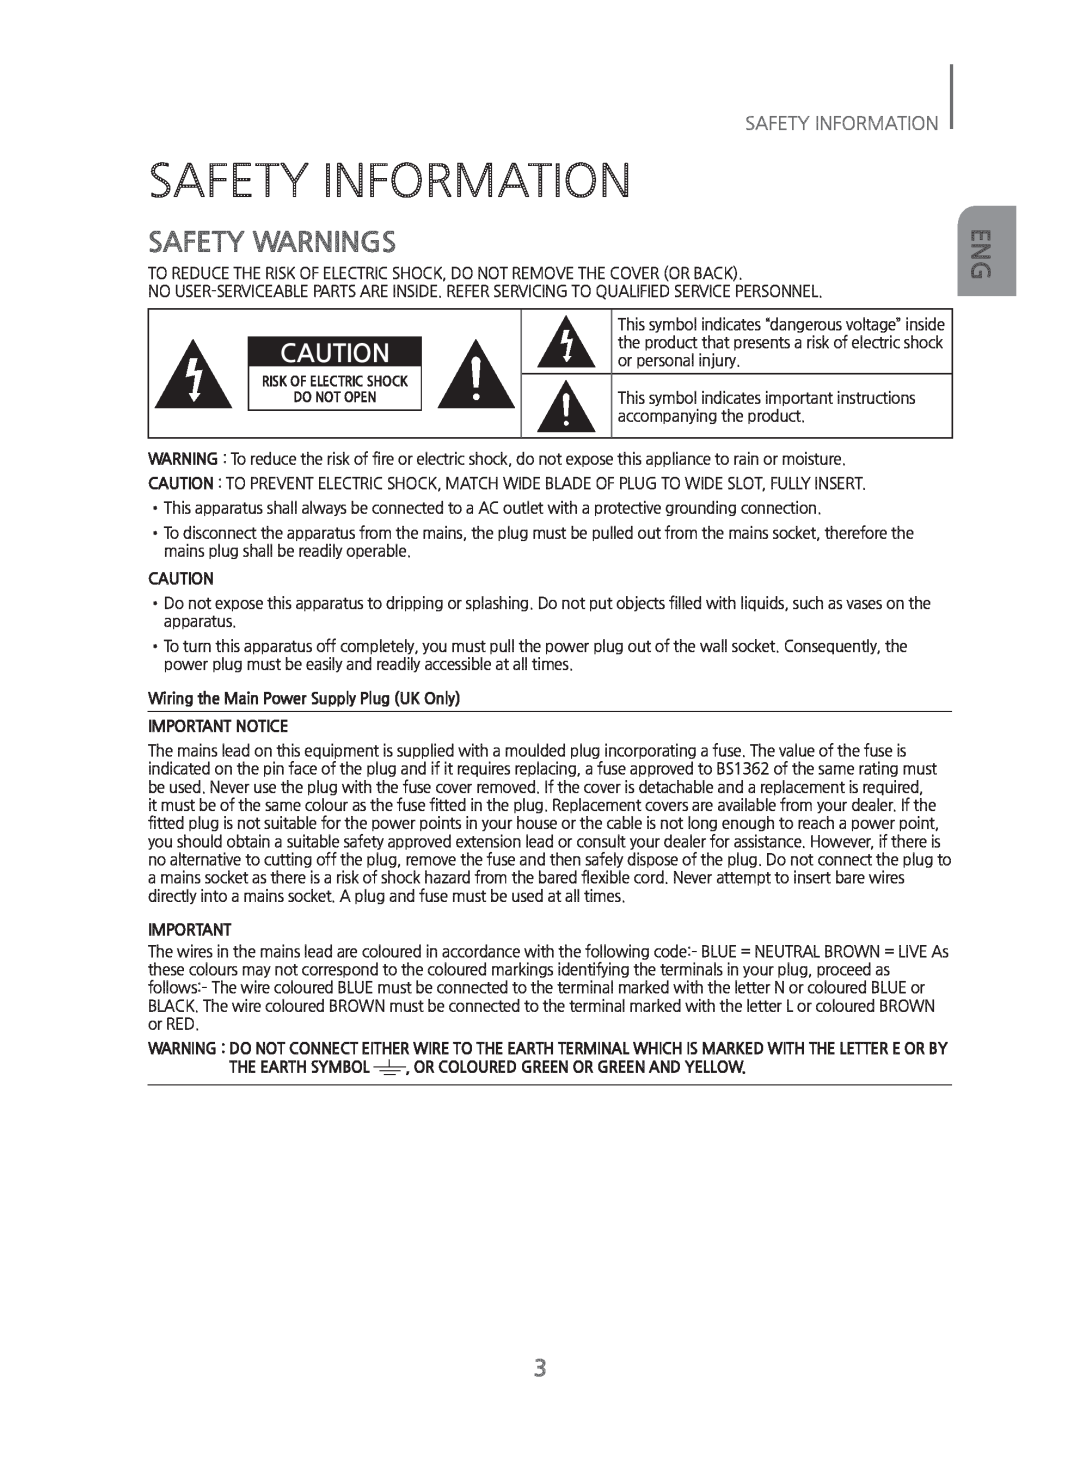 Samsung HWH750 manual Safety Information, Safety Warnings, Wiring the Main Power Supply Plug UK Only, Important Notice 